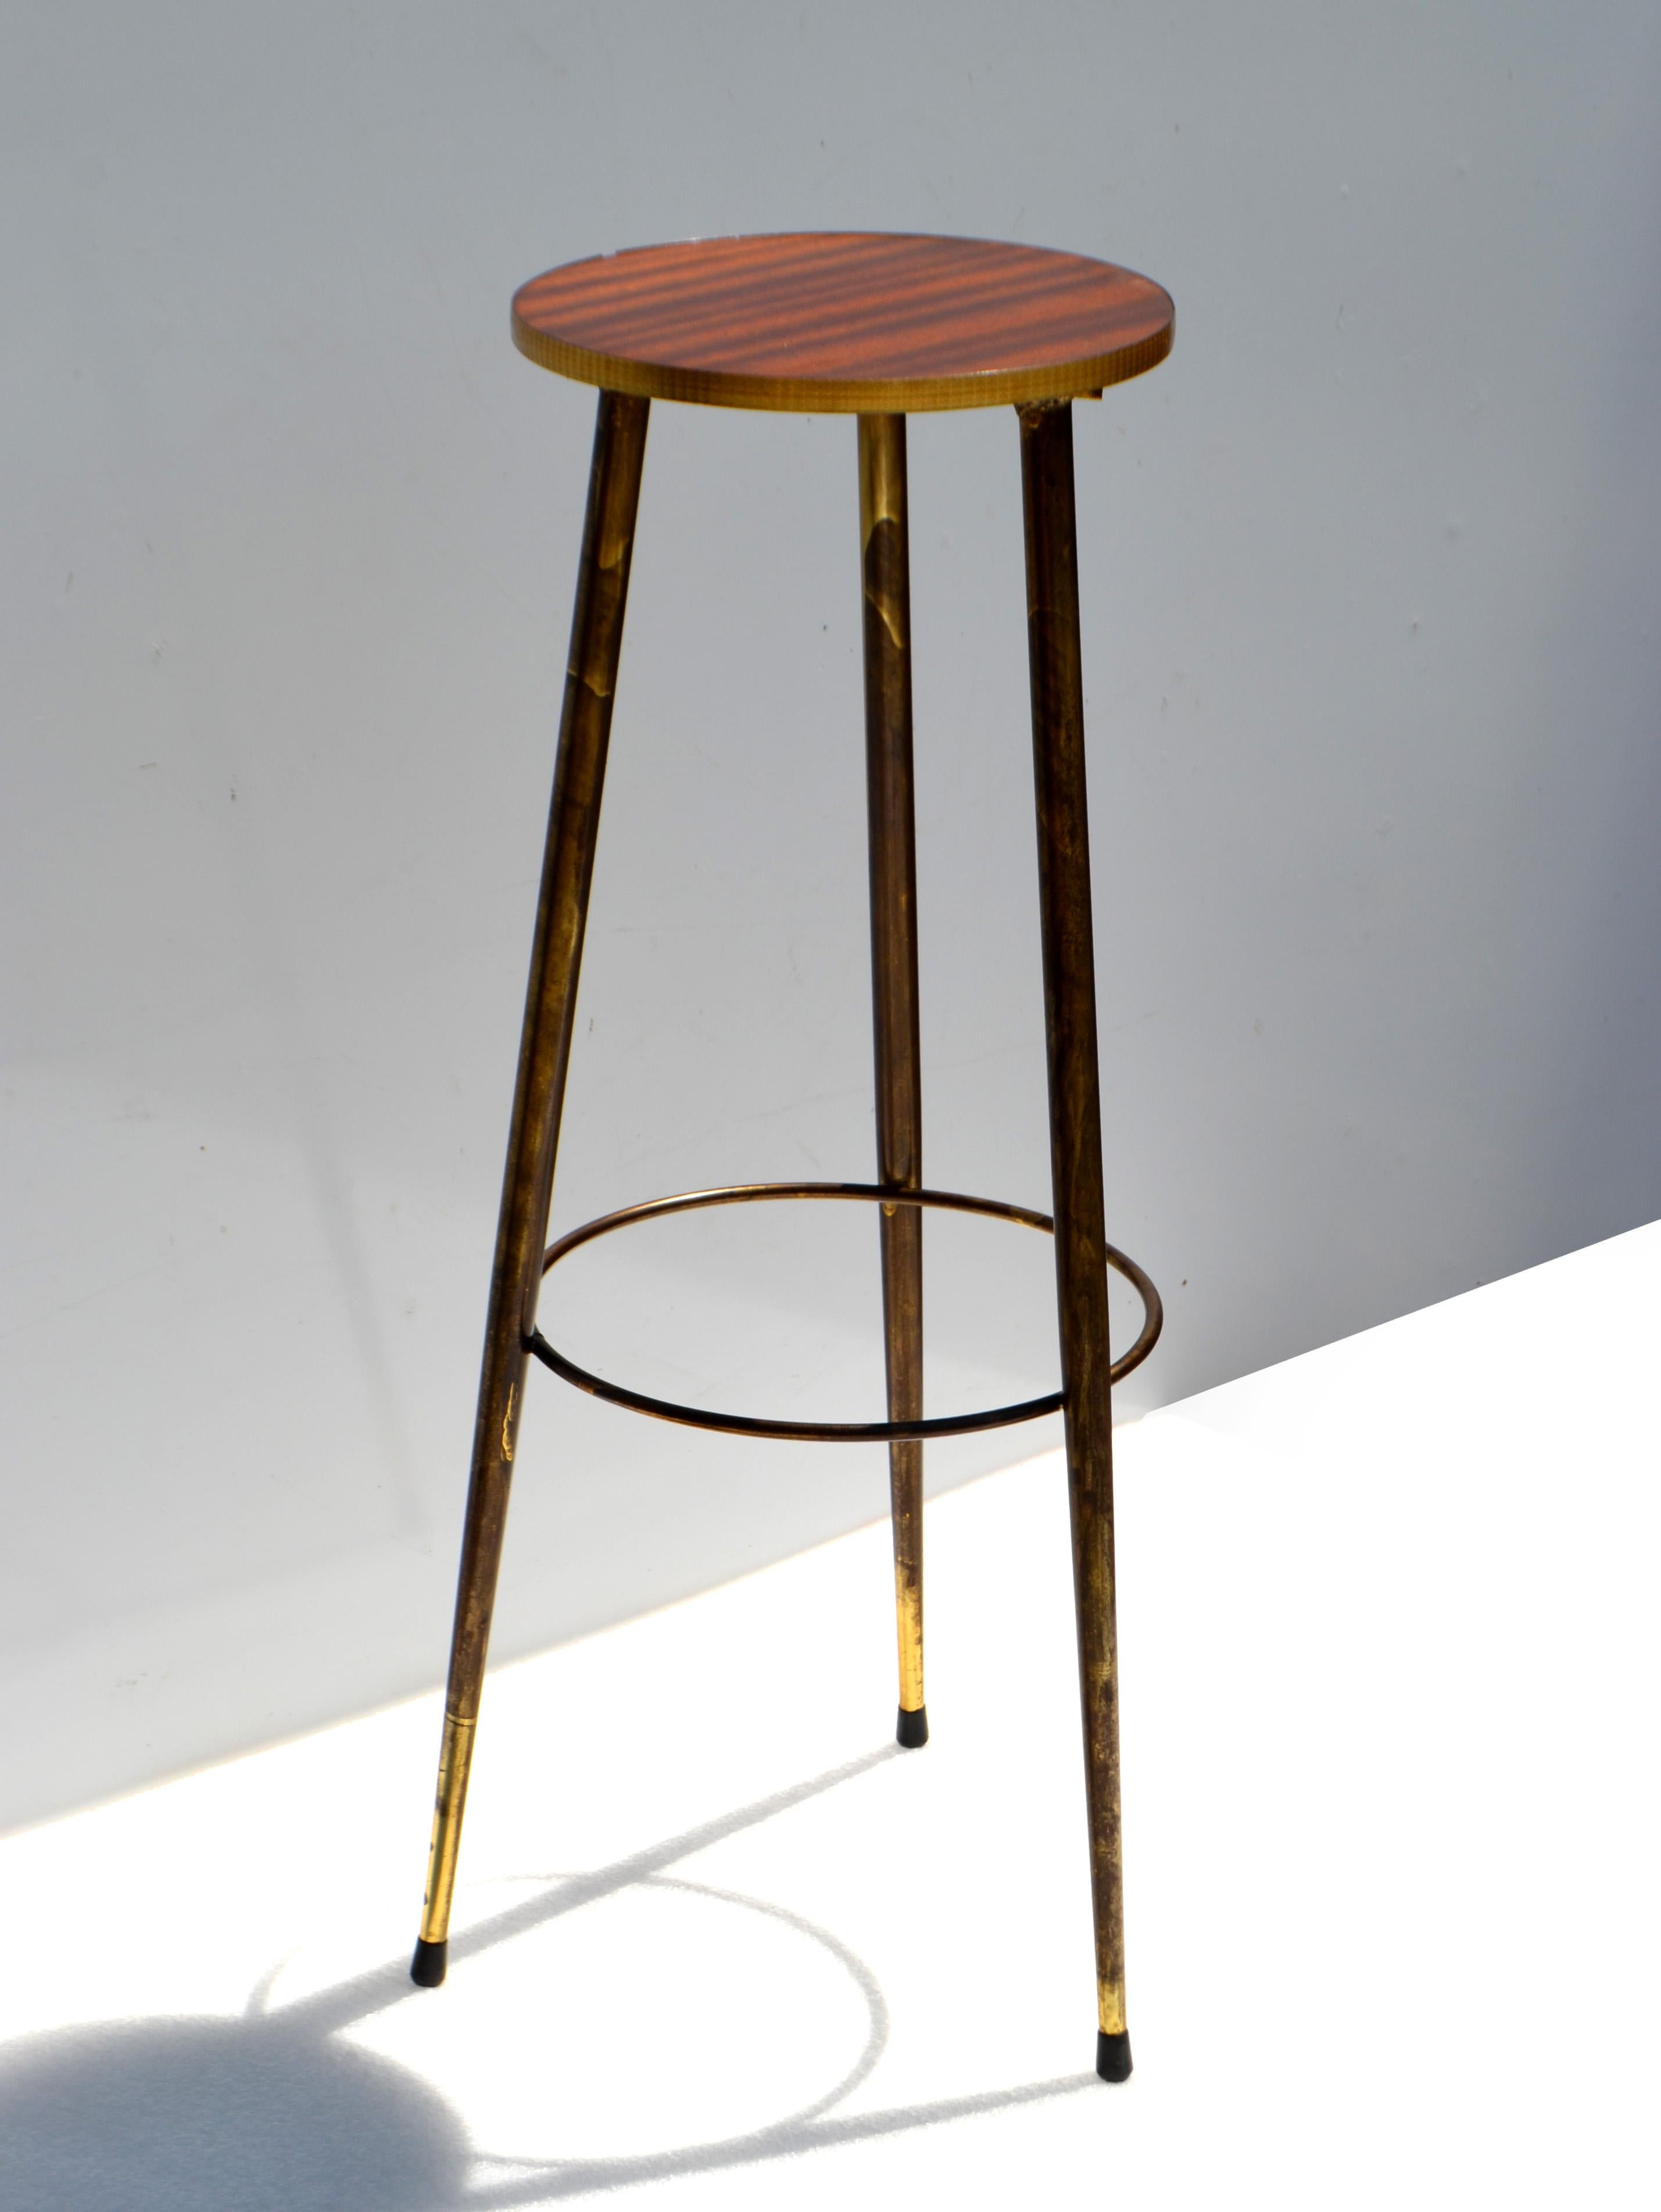 French Mid-Century Modern Bronze, Brass & Laminate Wood Drink Side Table Tripod Base For Sale